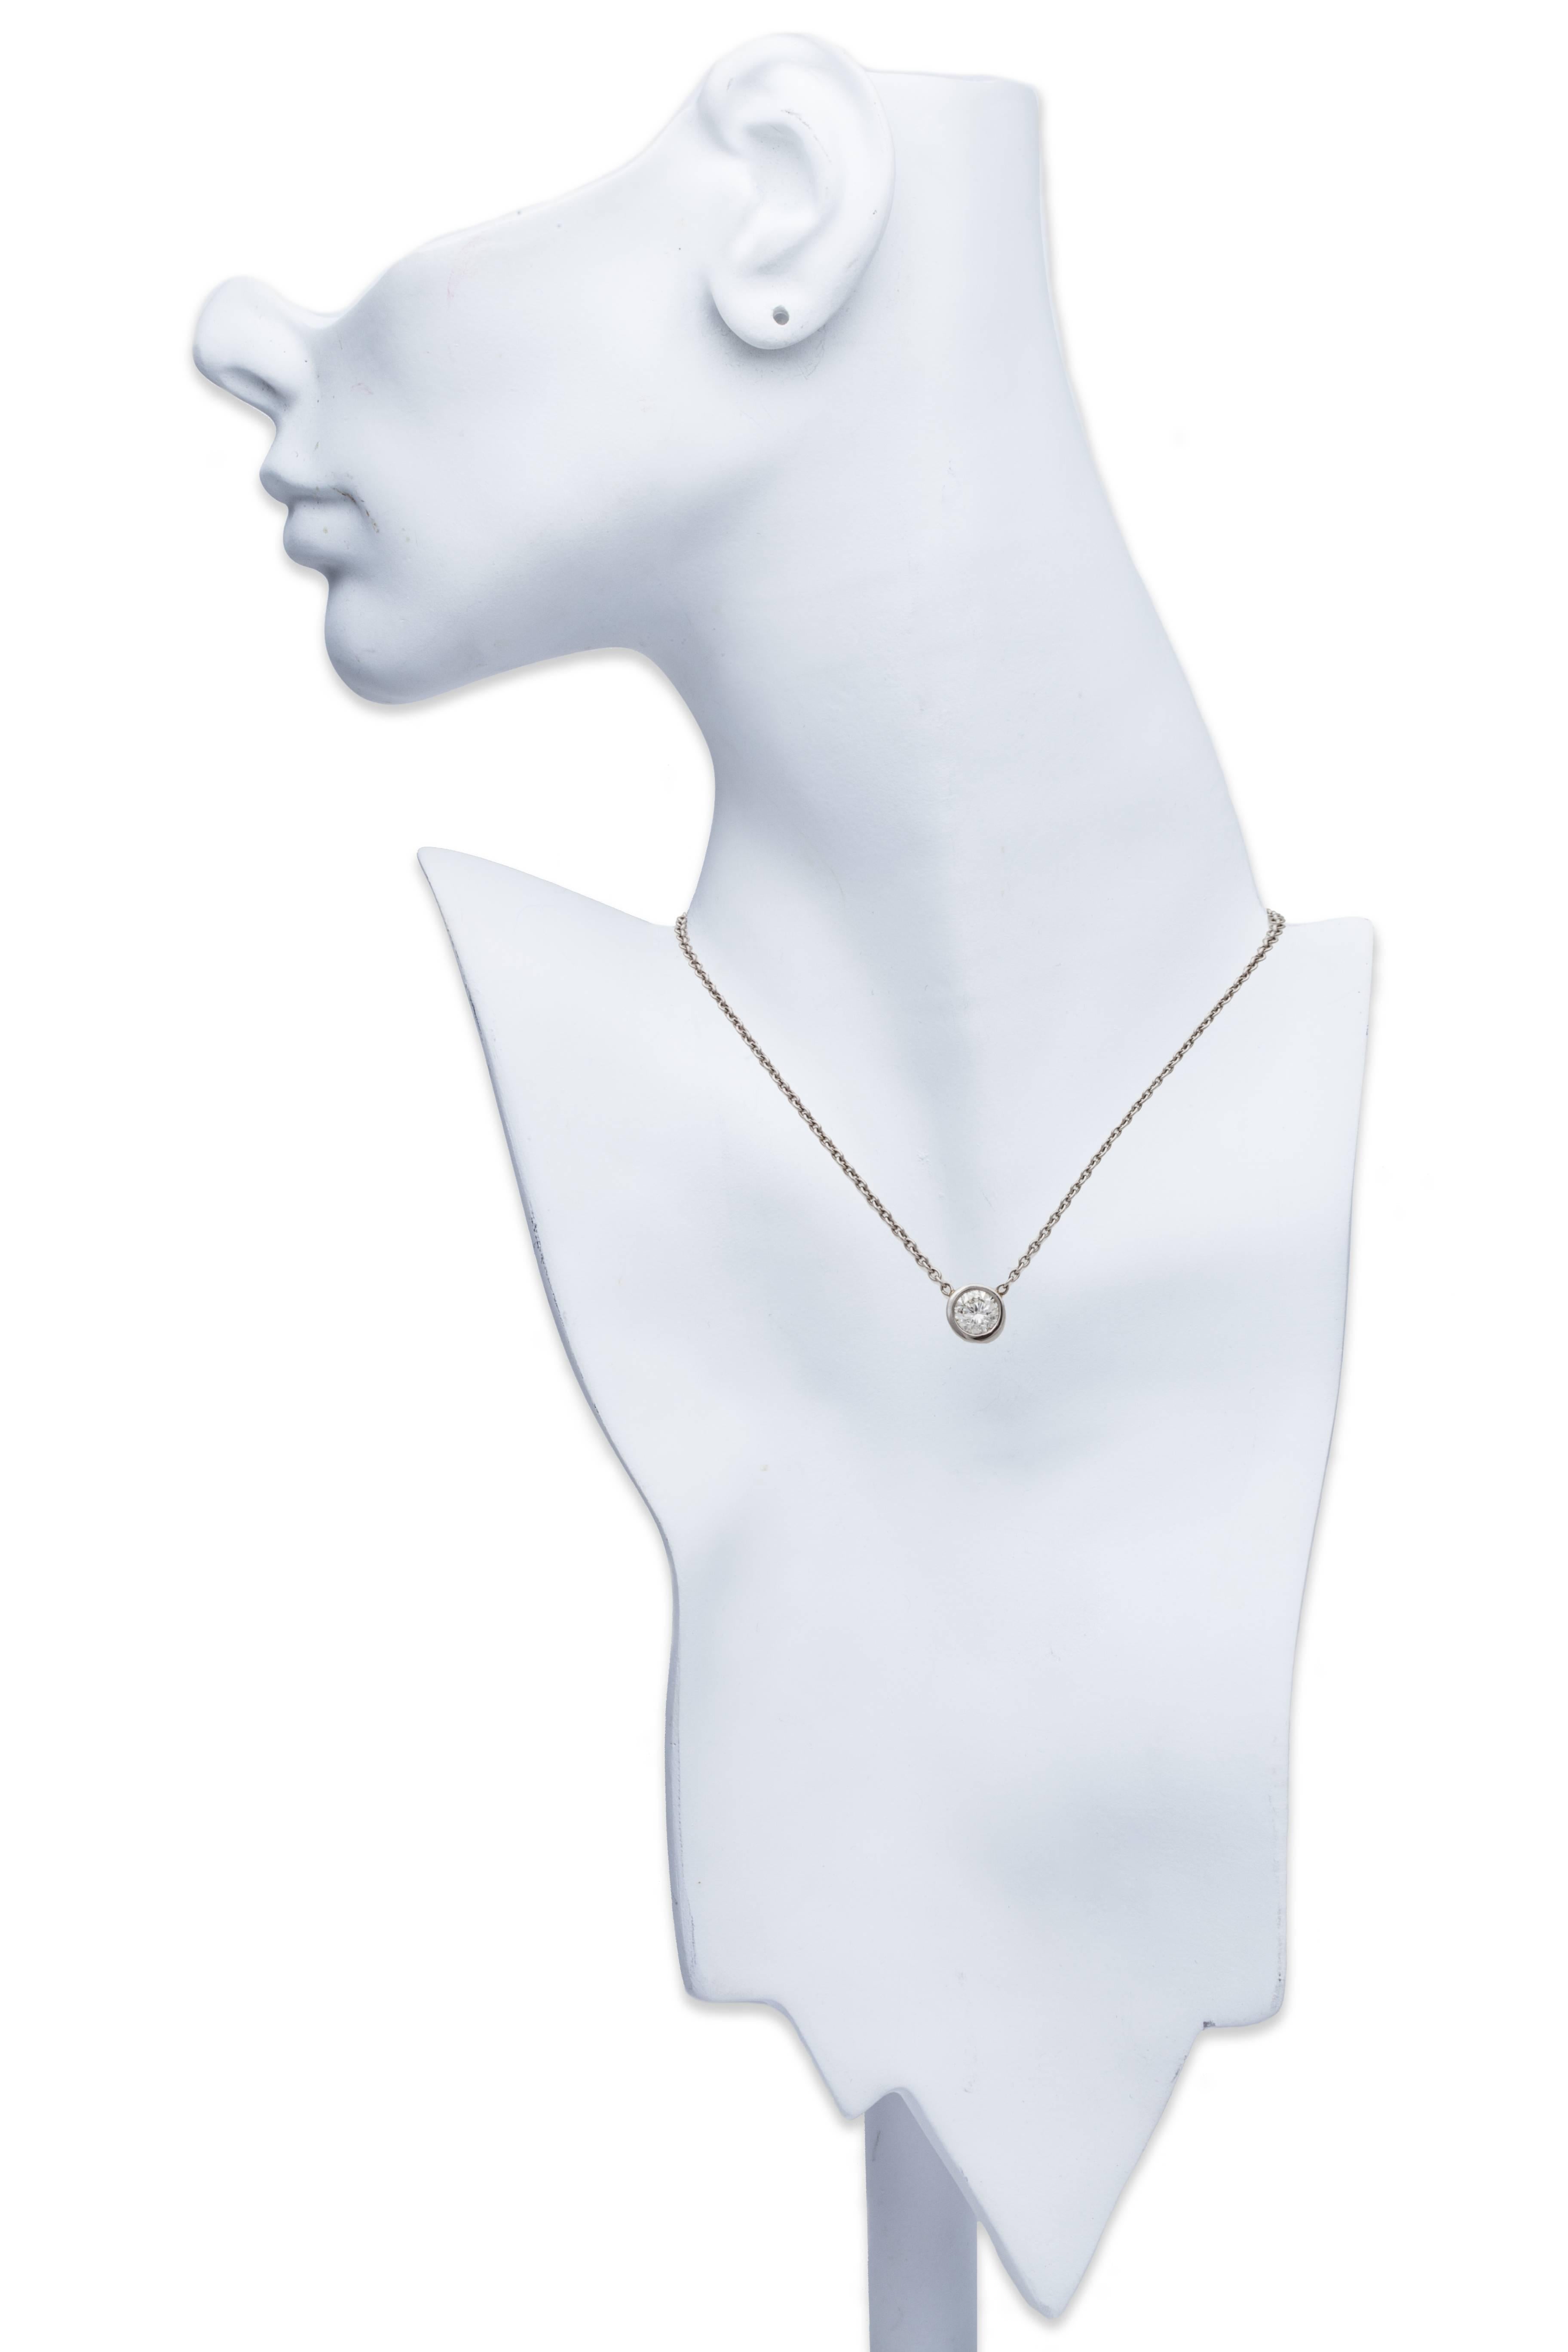 Solitaire Diamond Pendant Necklace in Platinum. Single bezel mounted brilliant cut diamond suspended from a platinum chain. Total Diamond Weight 0.75ct., Chain Length 15